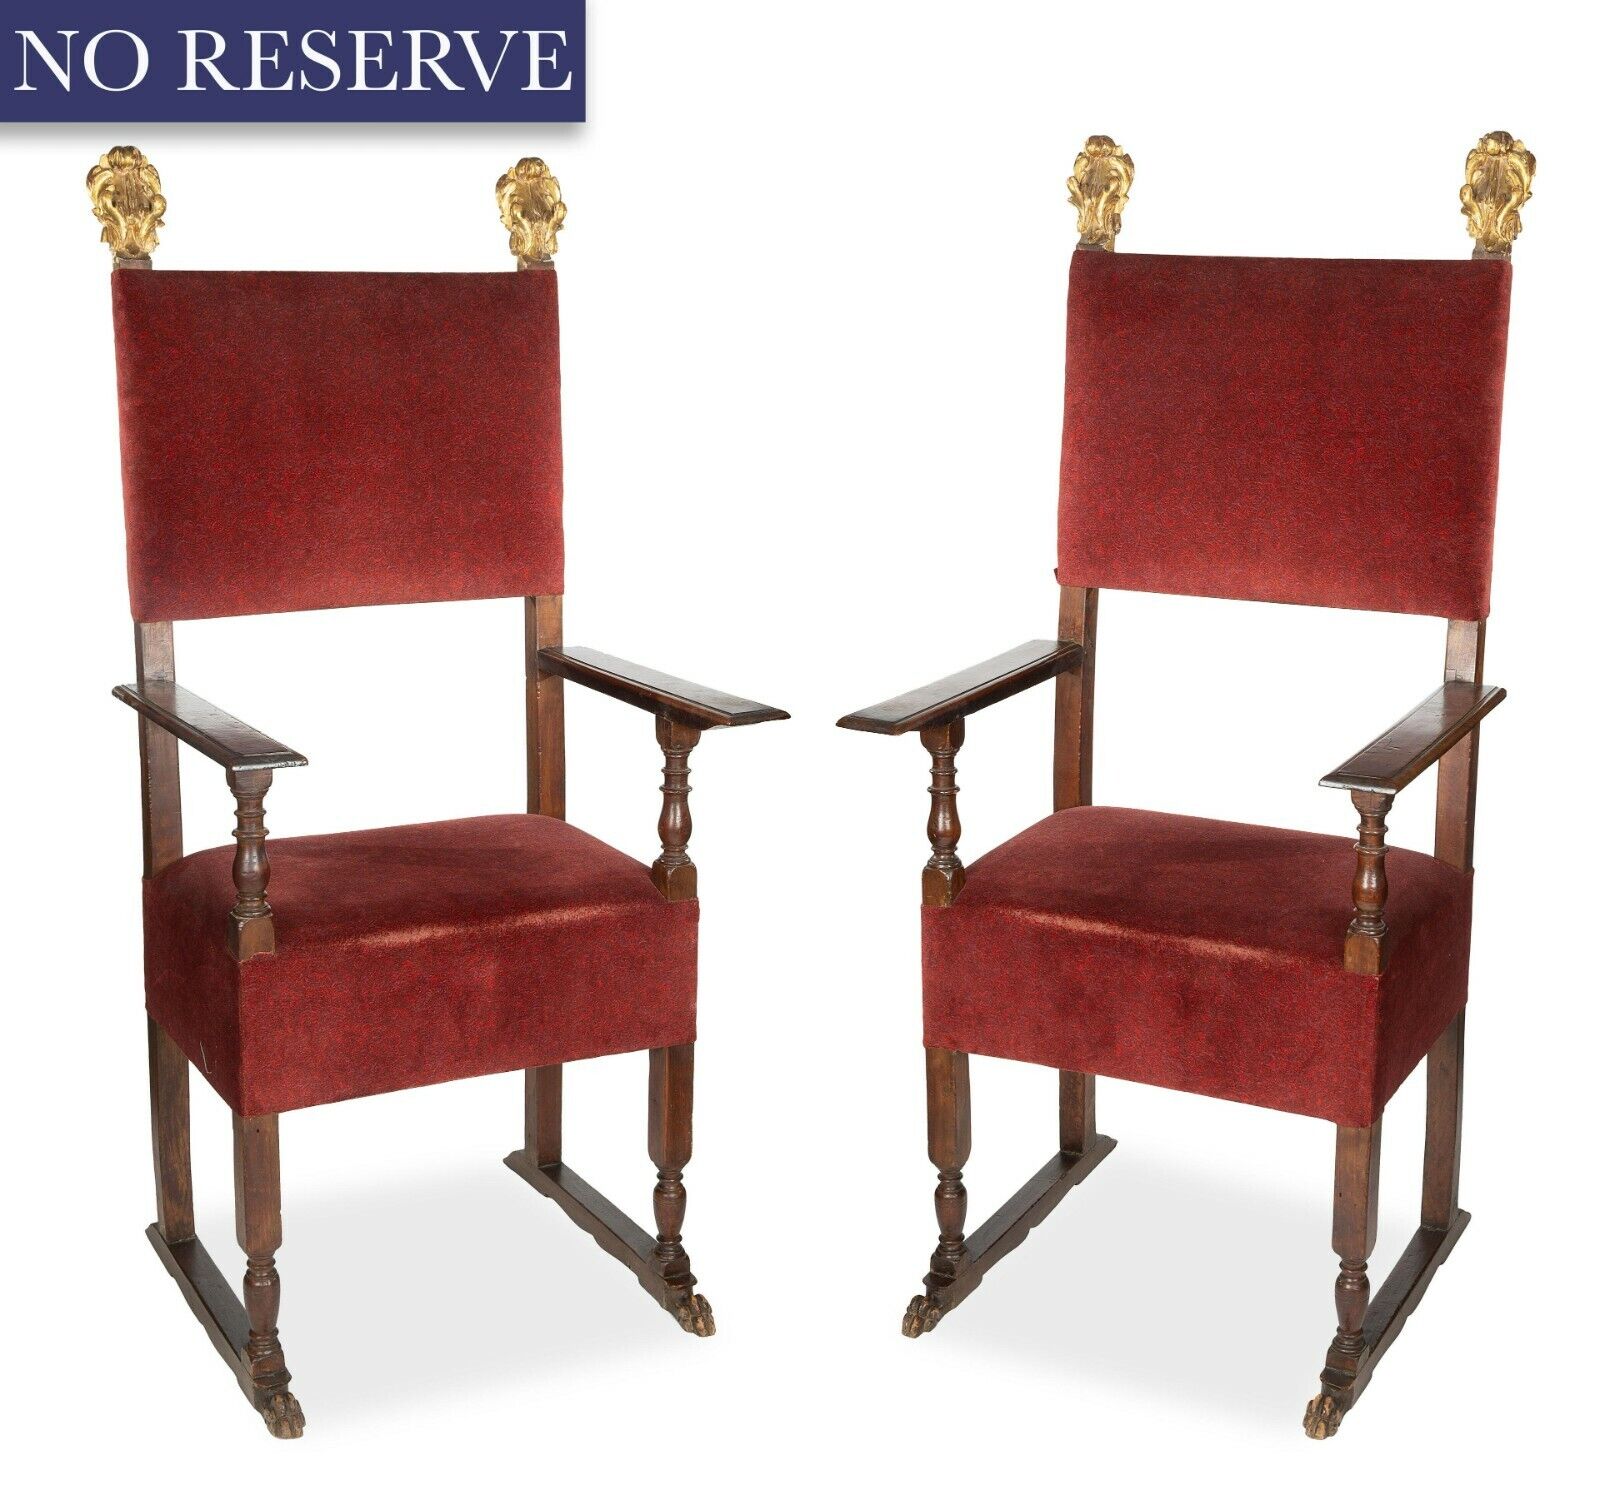 Antique Throne Chairs, Italian Gilt and Carved Wood, Red, A Pair, 1700's, 18th C